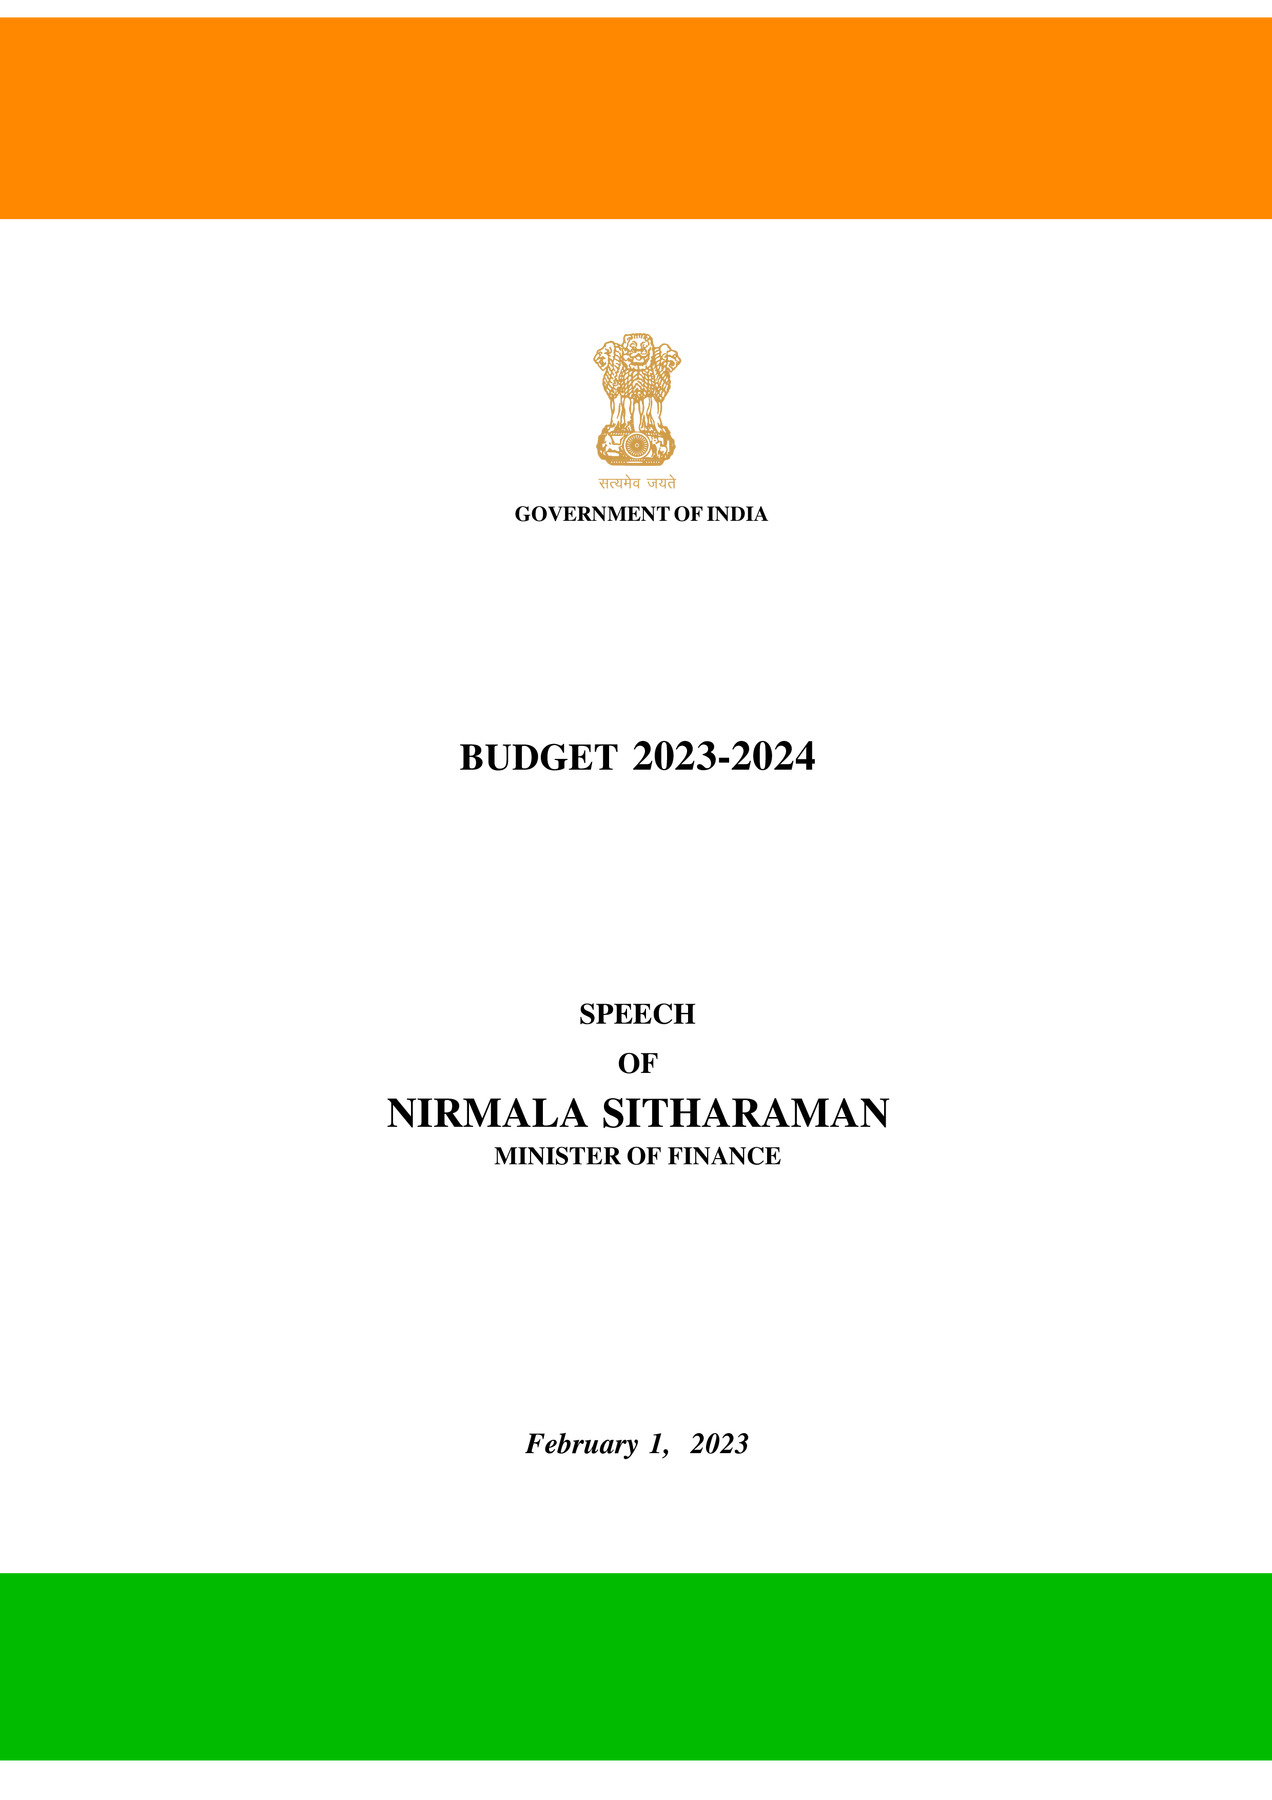 Union Budget Speech 2023-24 by Finance Minister of India PDF